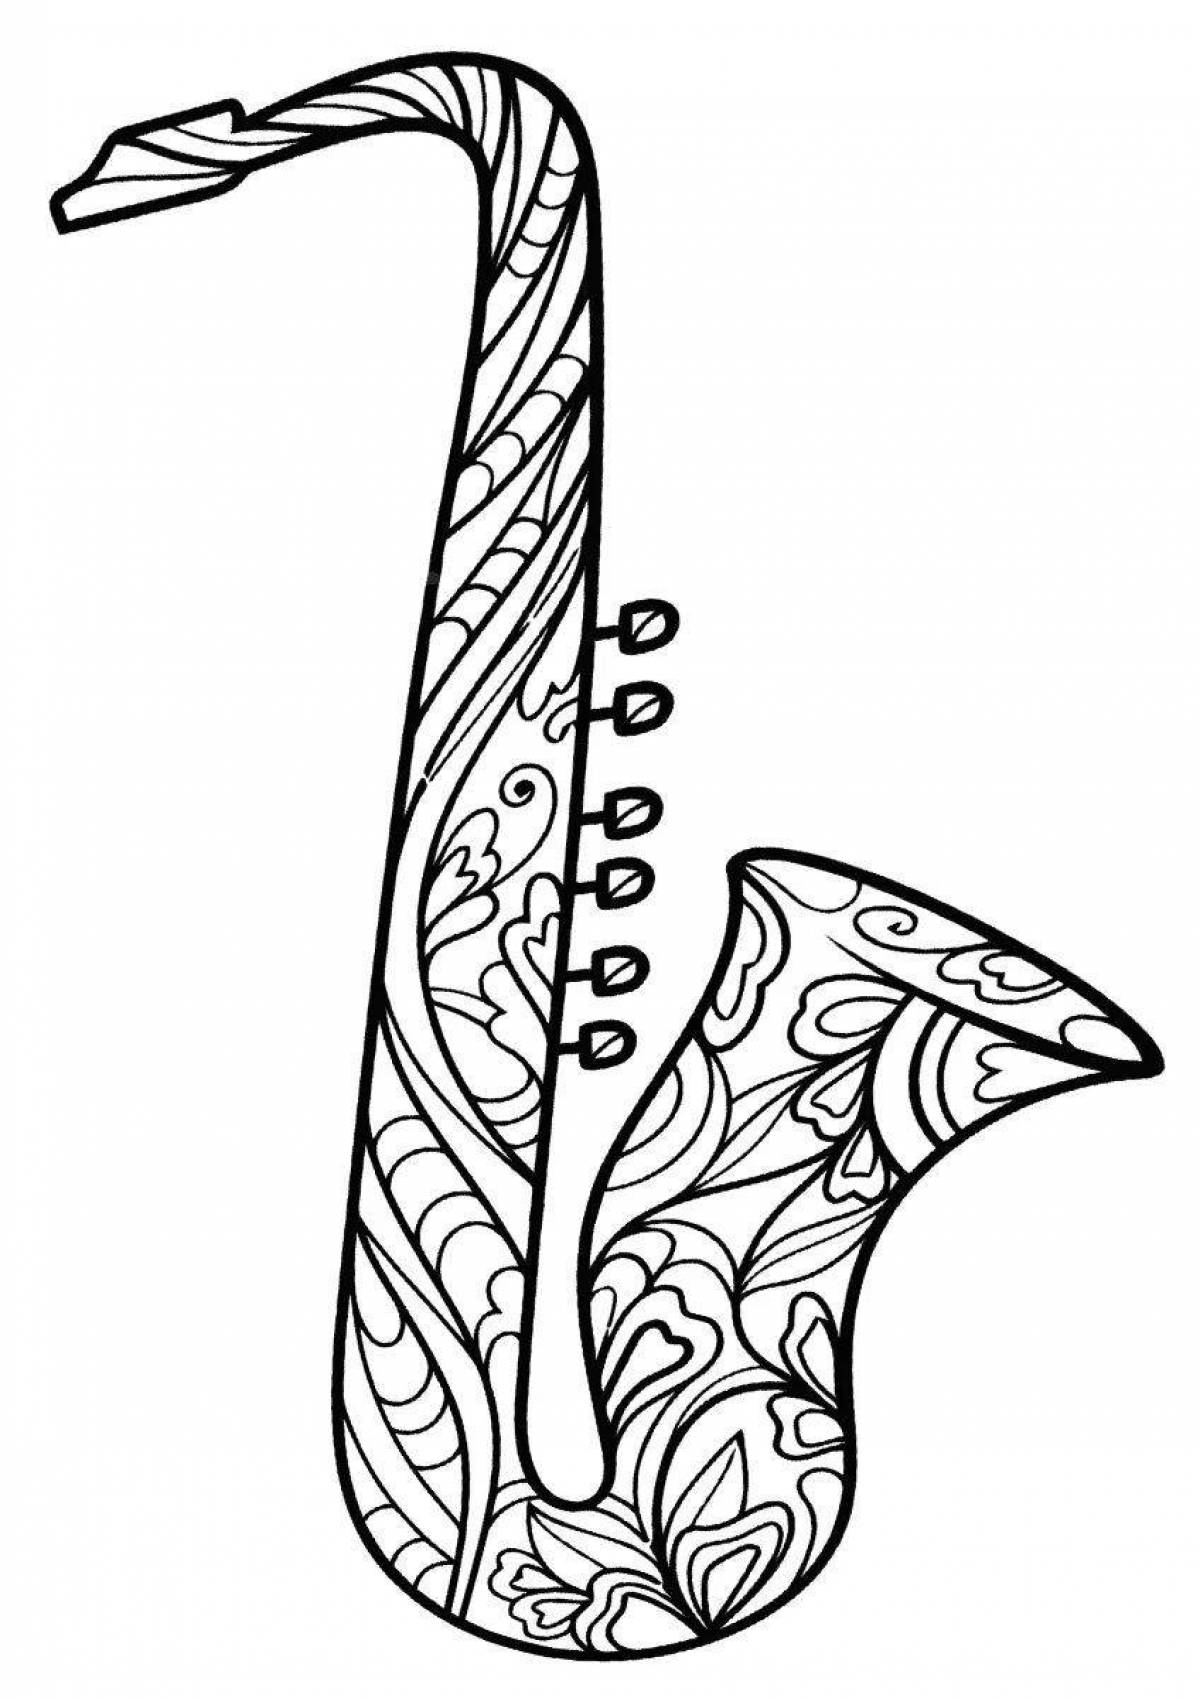 Charming saxophone coloring page